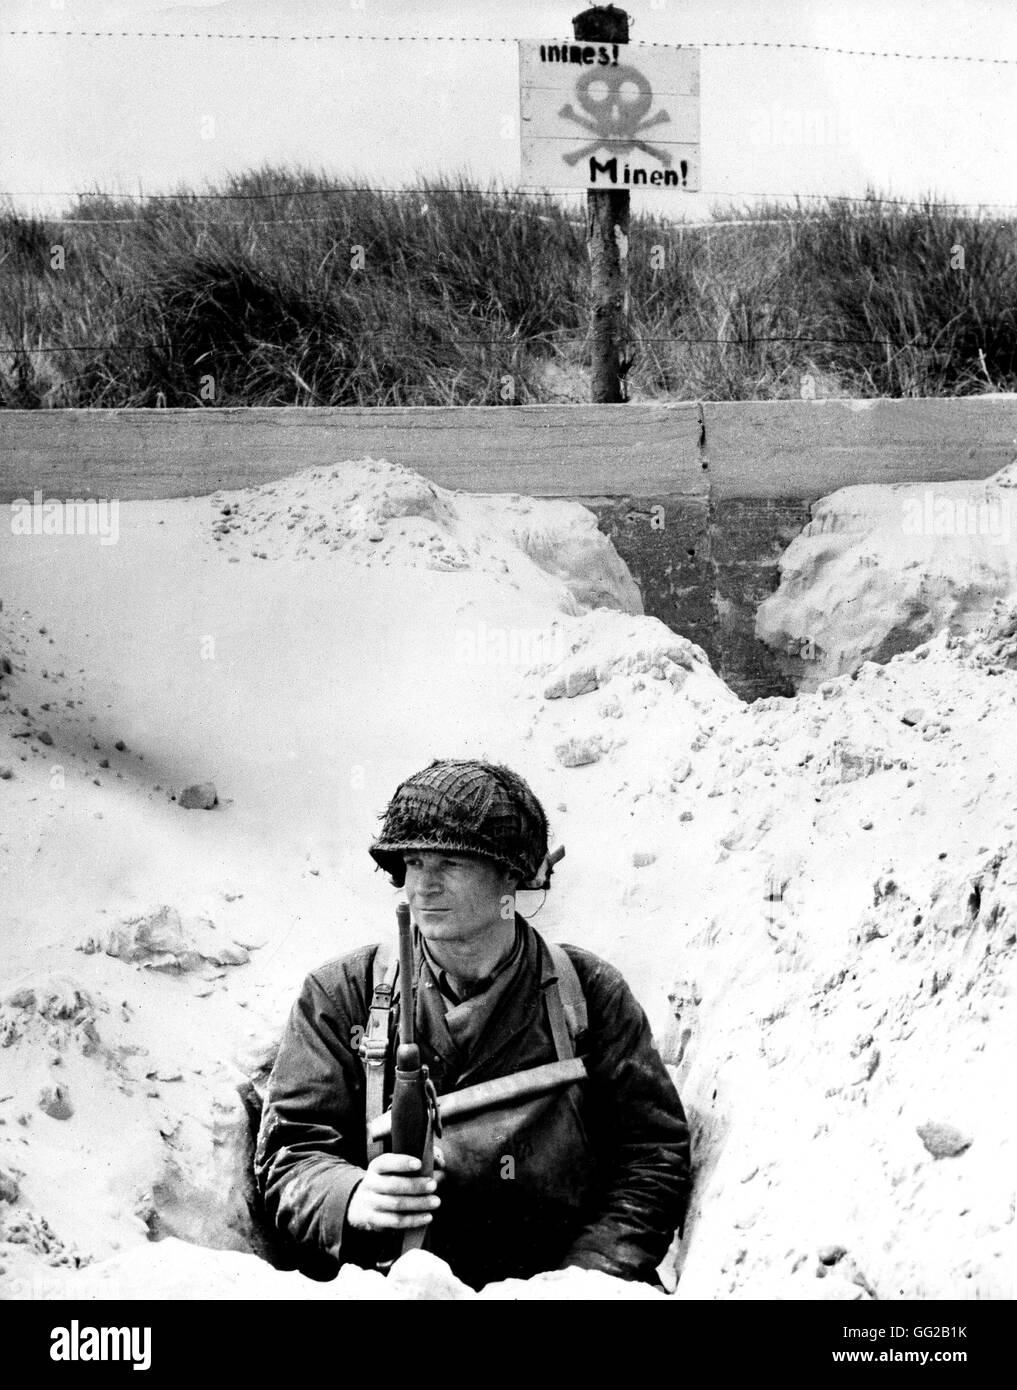 Normandy landings: An American soldier hidden in a trench watches the beach Above him, the German placard reads that the area is mined June 1944 France, Second World War war National archives, Washington Stock Photo